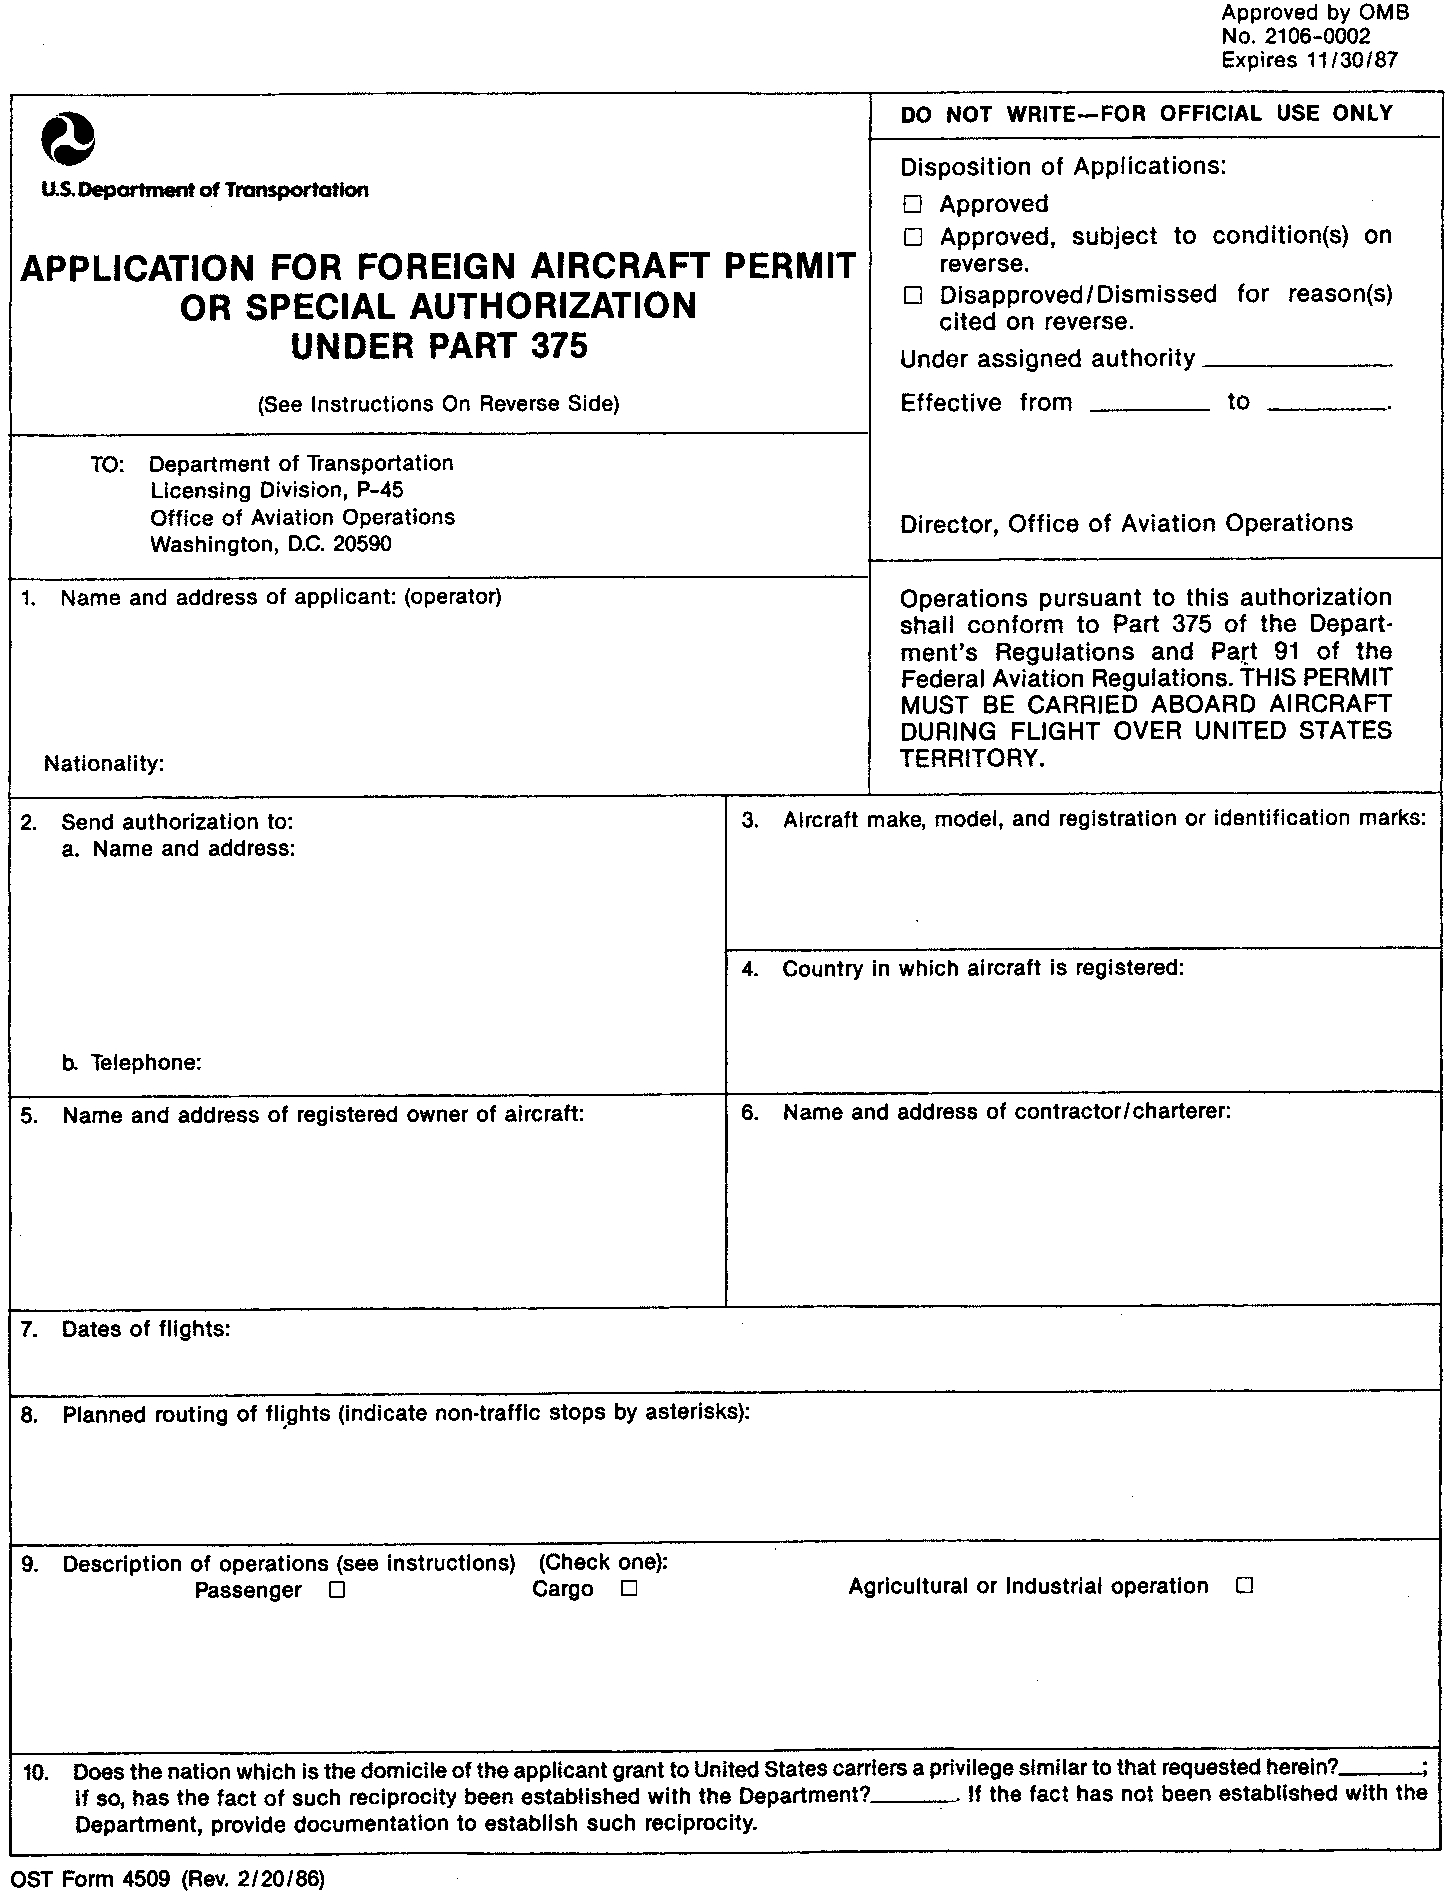 Graphic of Appendix A to Part 375—Form 4509